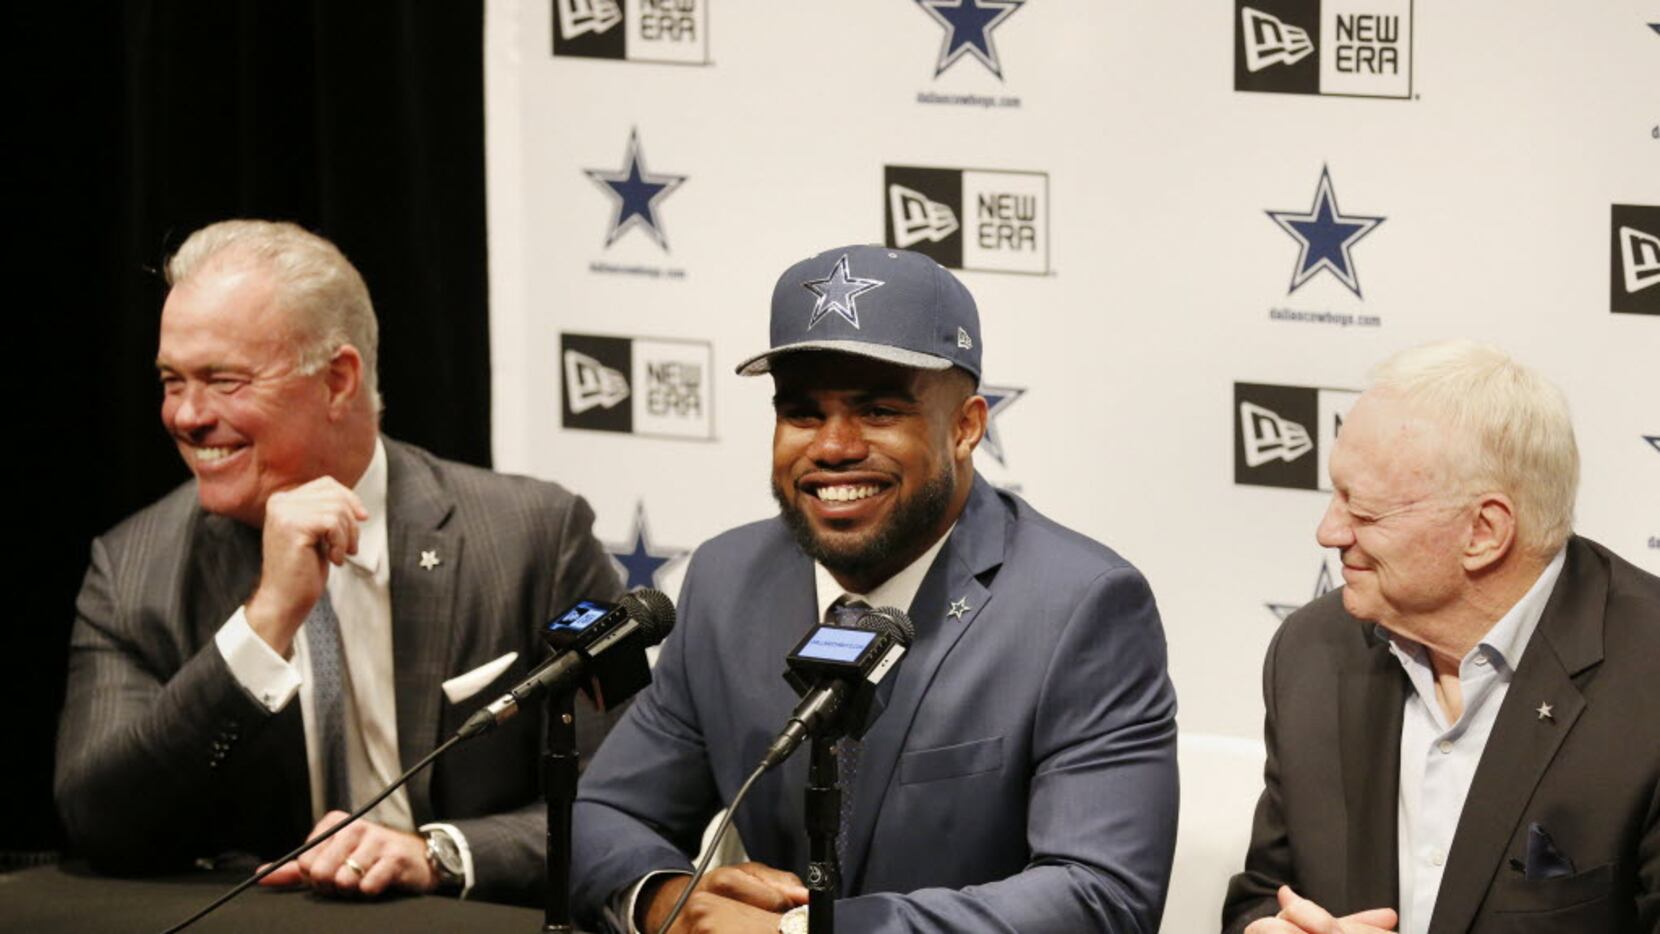 How do you feel about the Cowboys' new NFL draft hats?